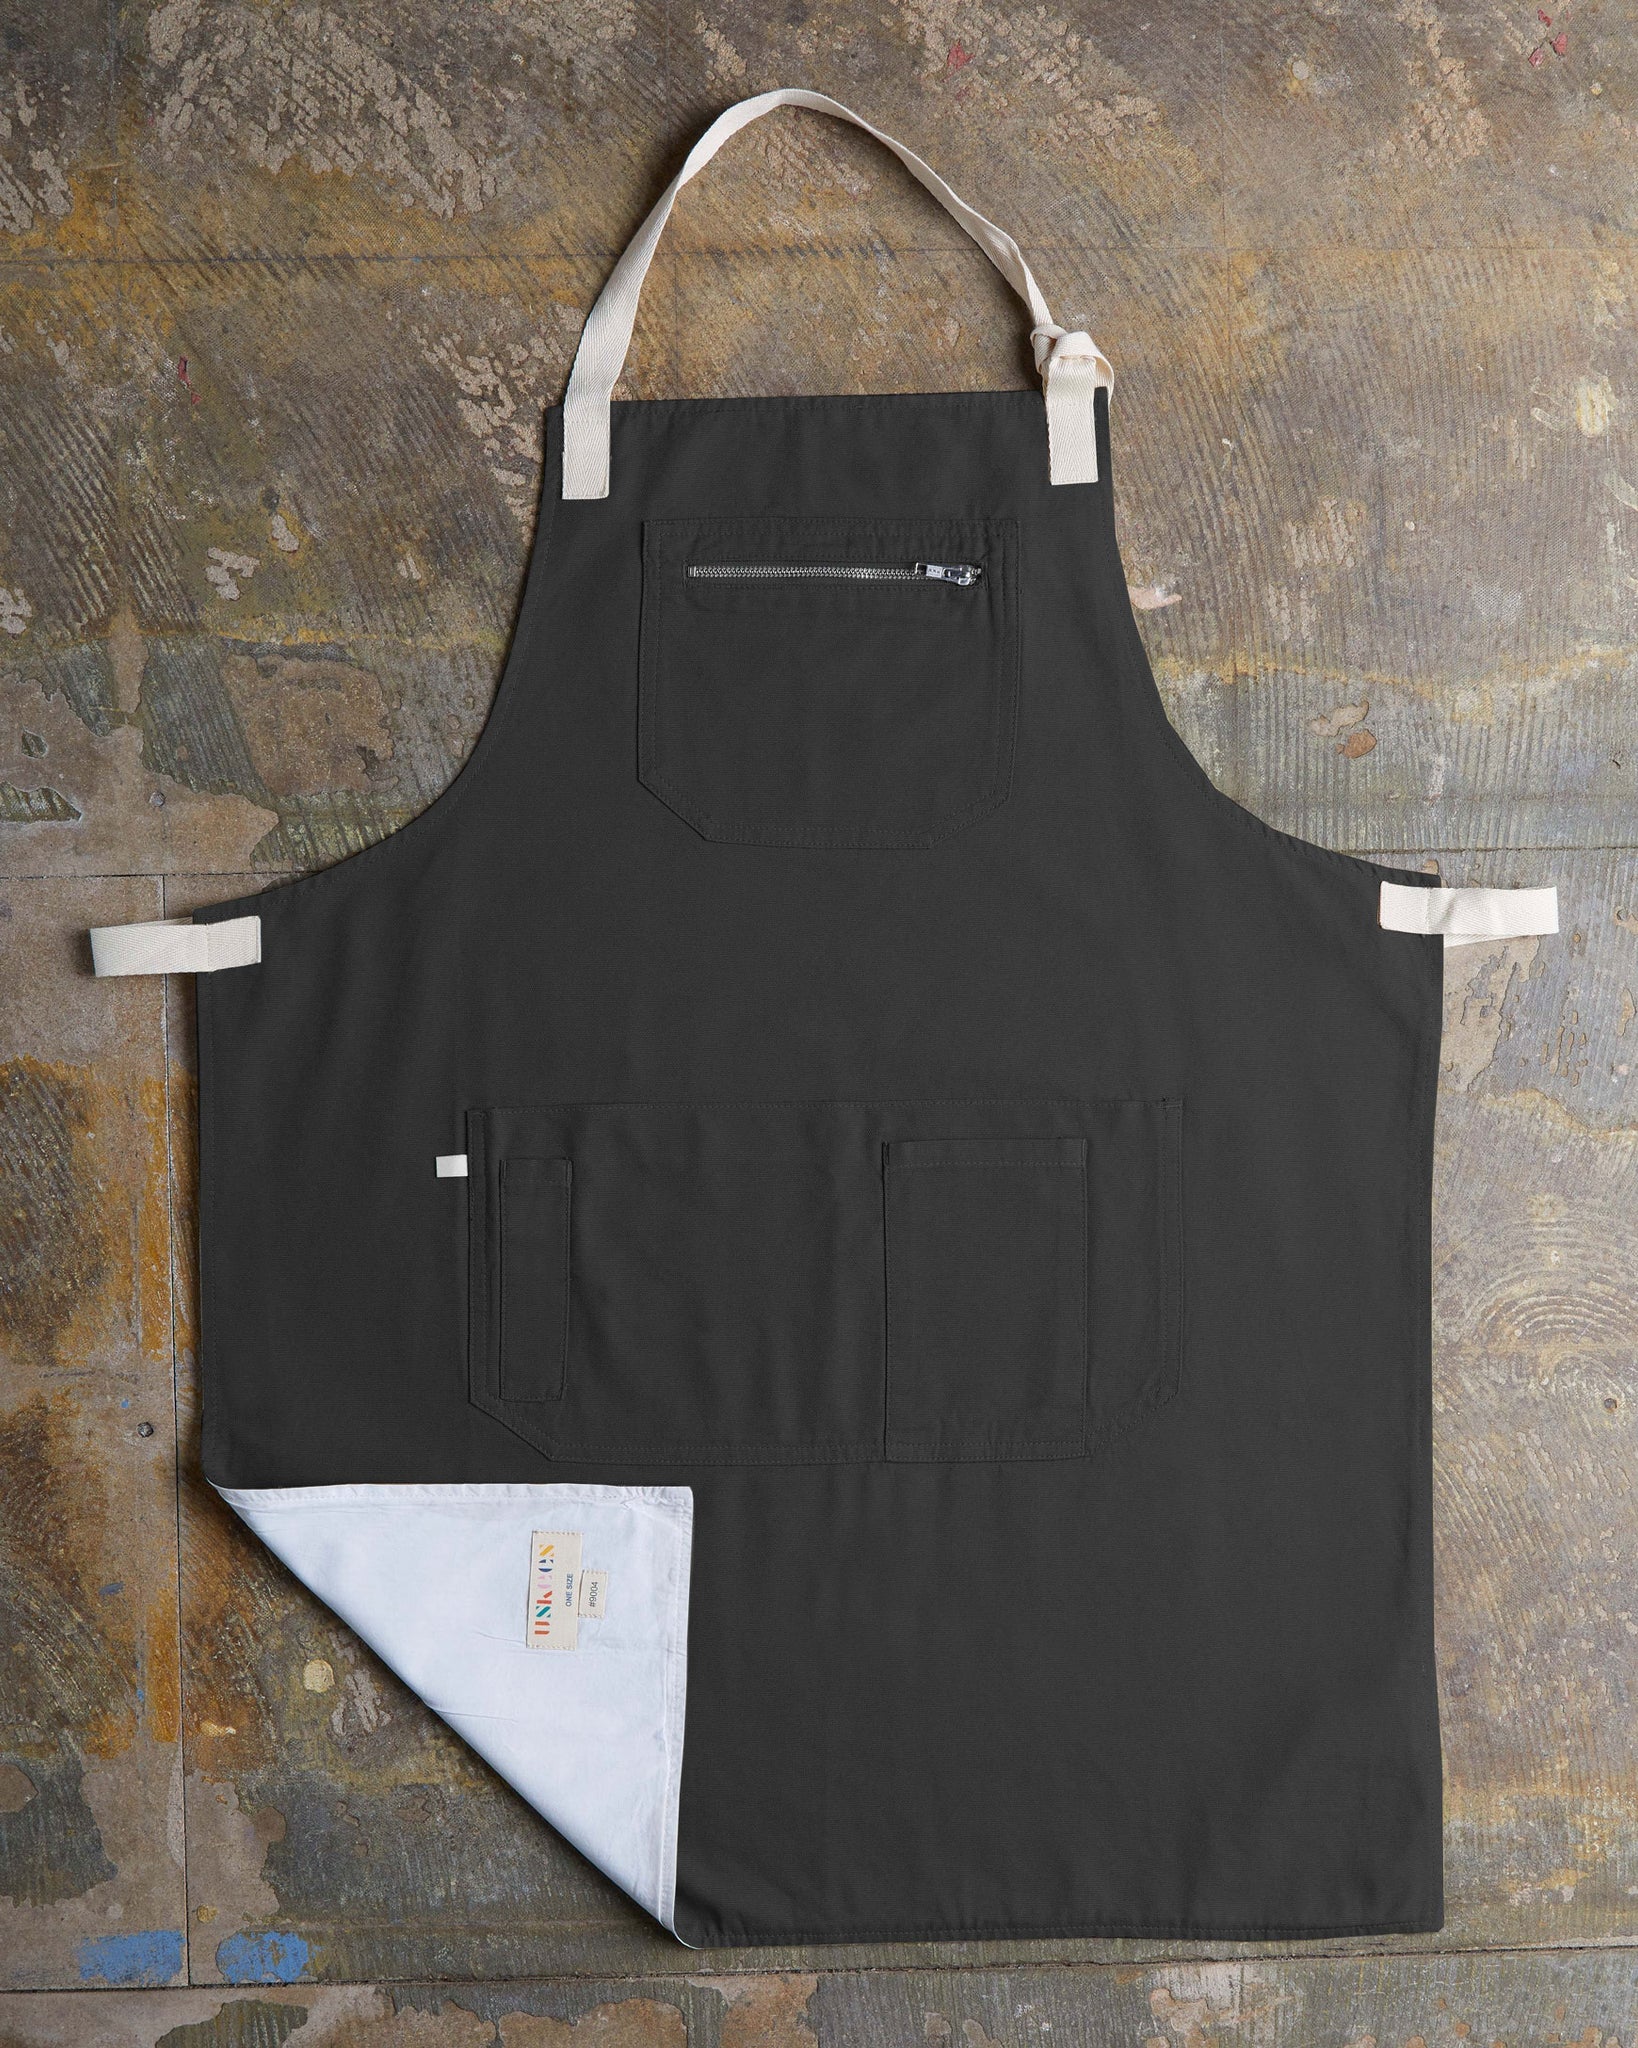 Full, flat view of 'faded black' #9004 carpenter apron by Uskees. Showing pen, phone and pouch pockets with left corner folded up to reveal lining and 'Uskees' label.